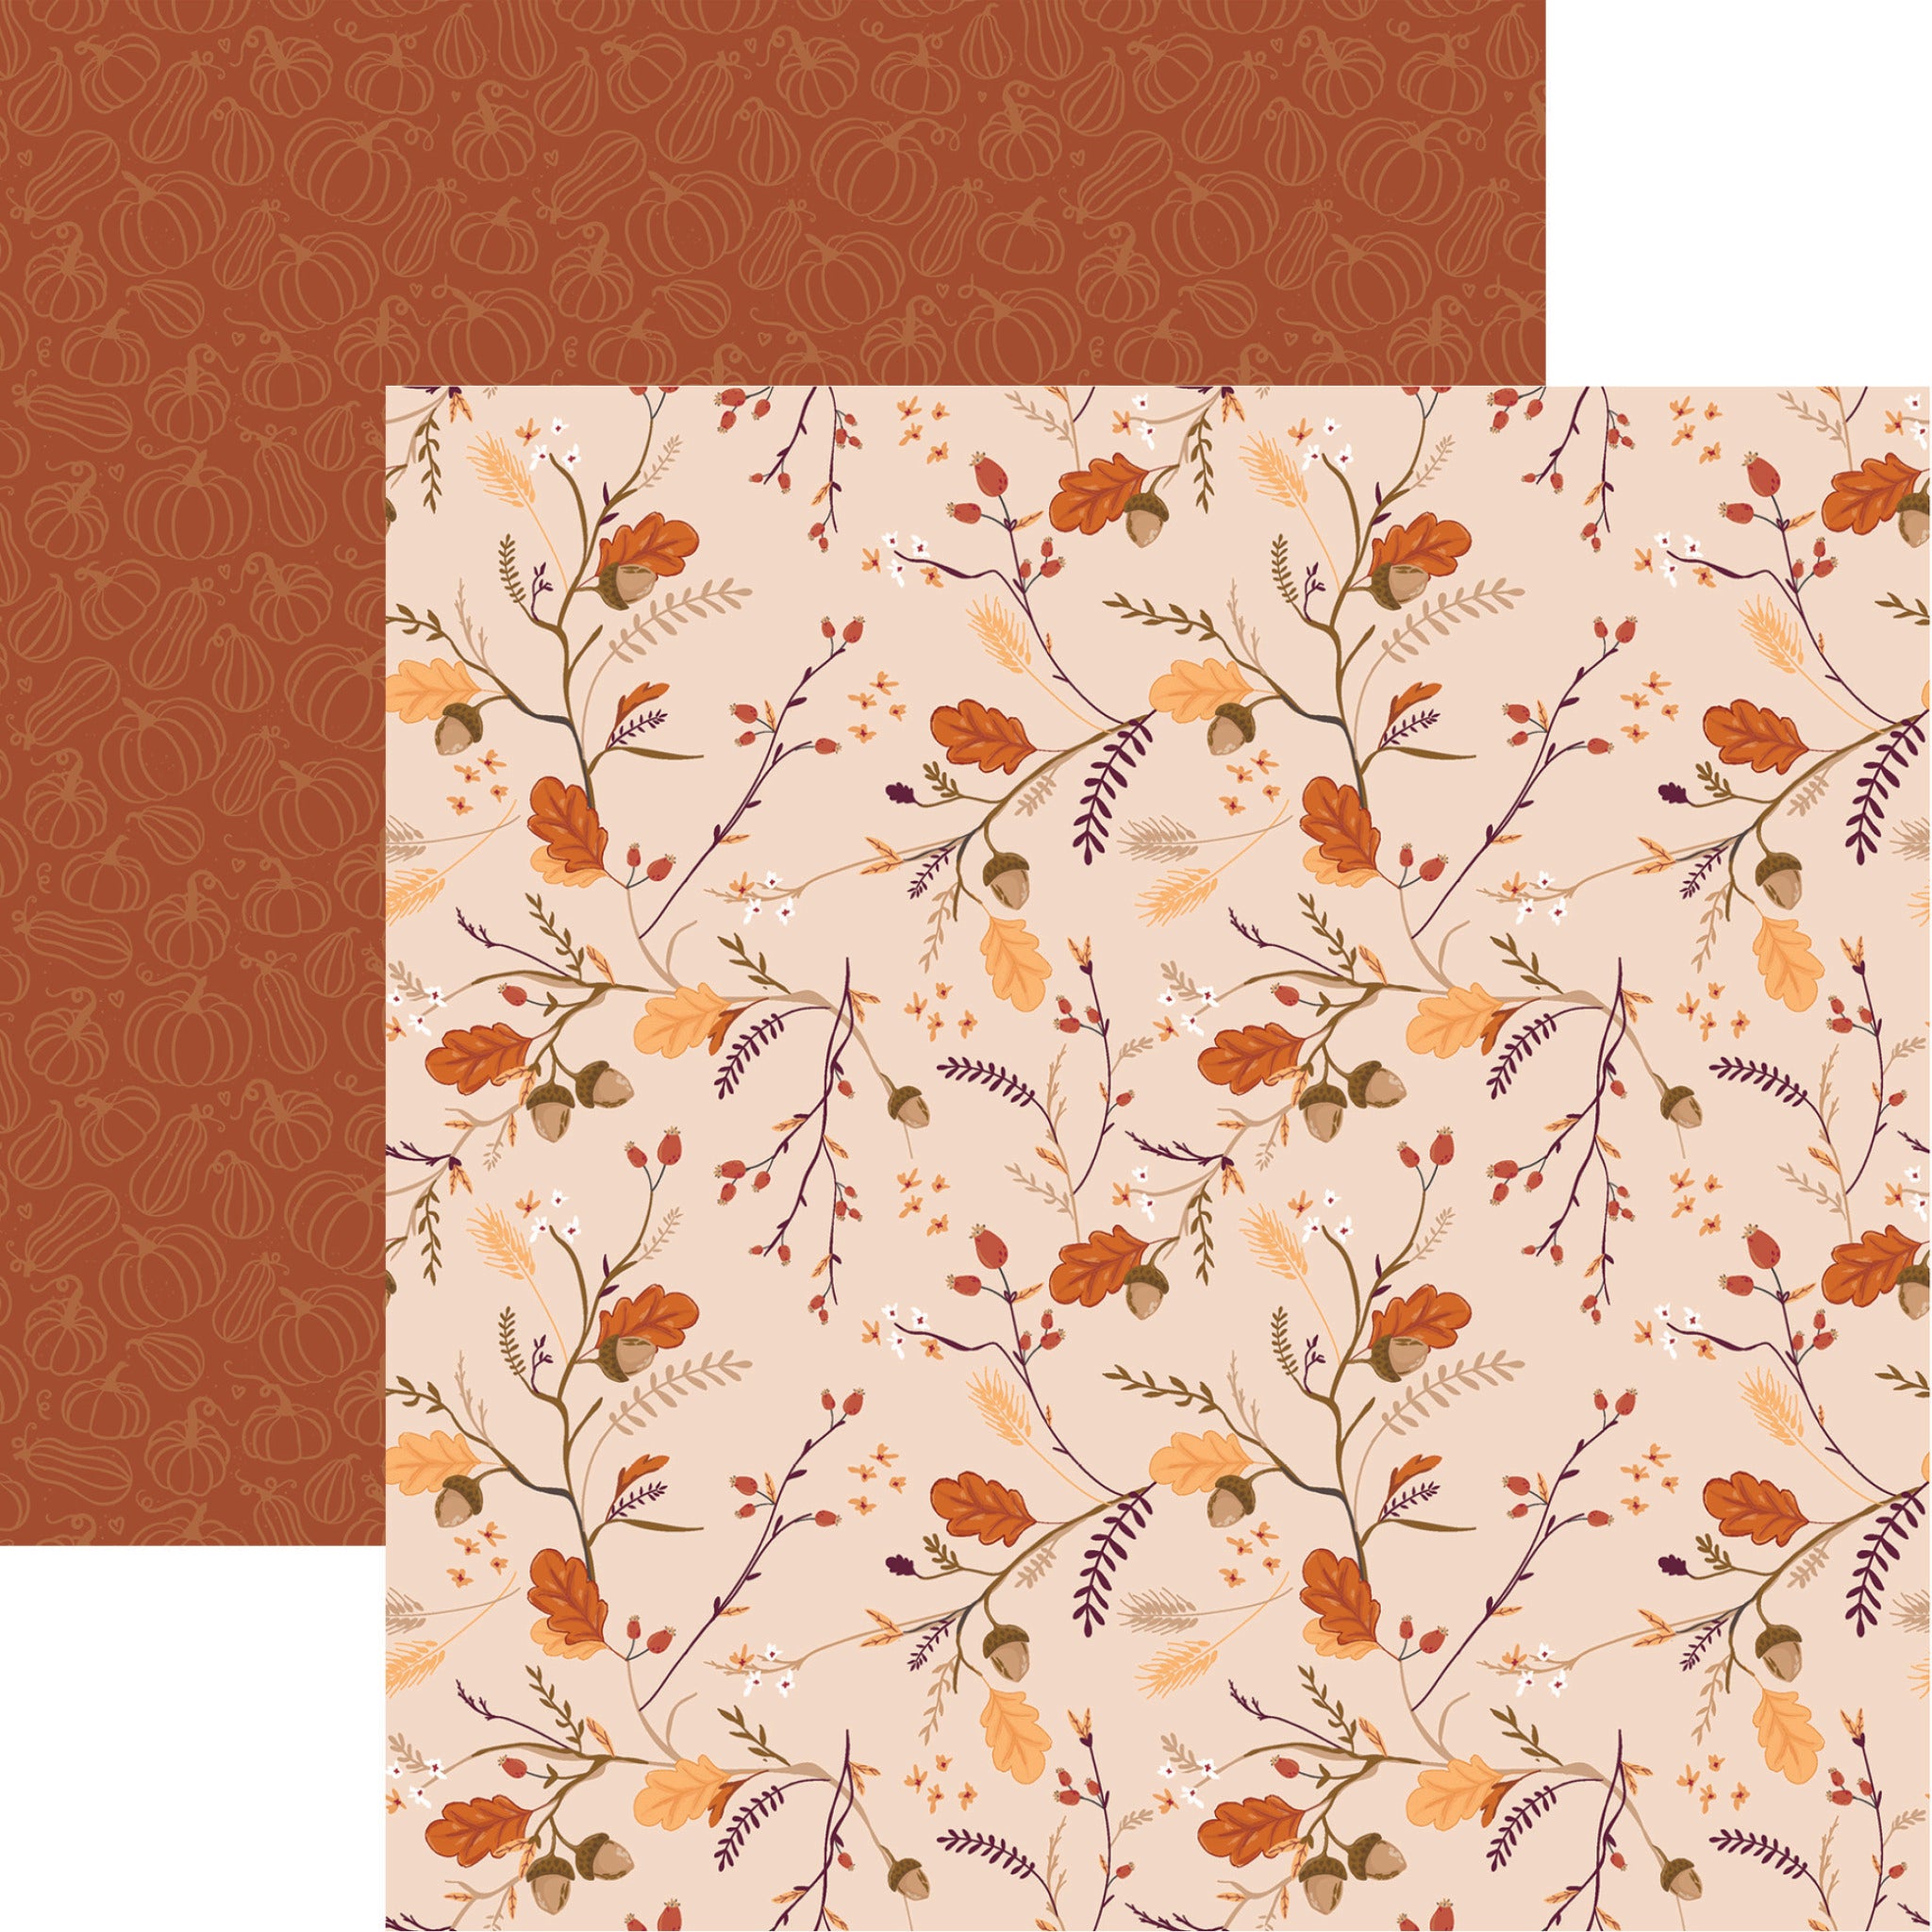 Crafts 12X12 Paper Kit Fall into Fall Colors Leaves Pumpkins